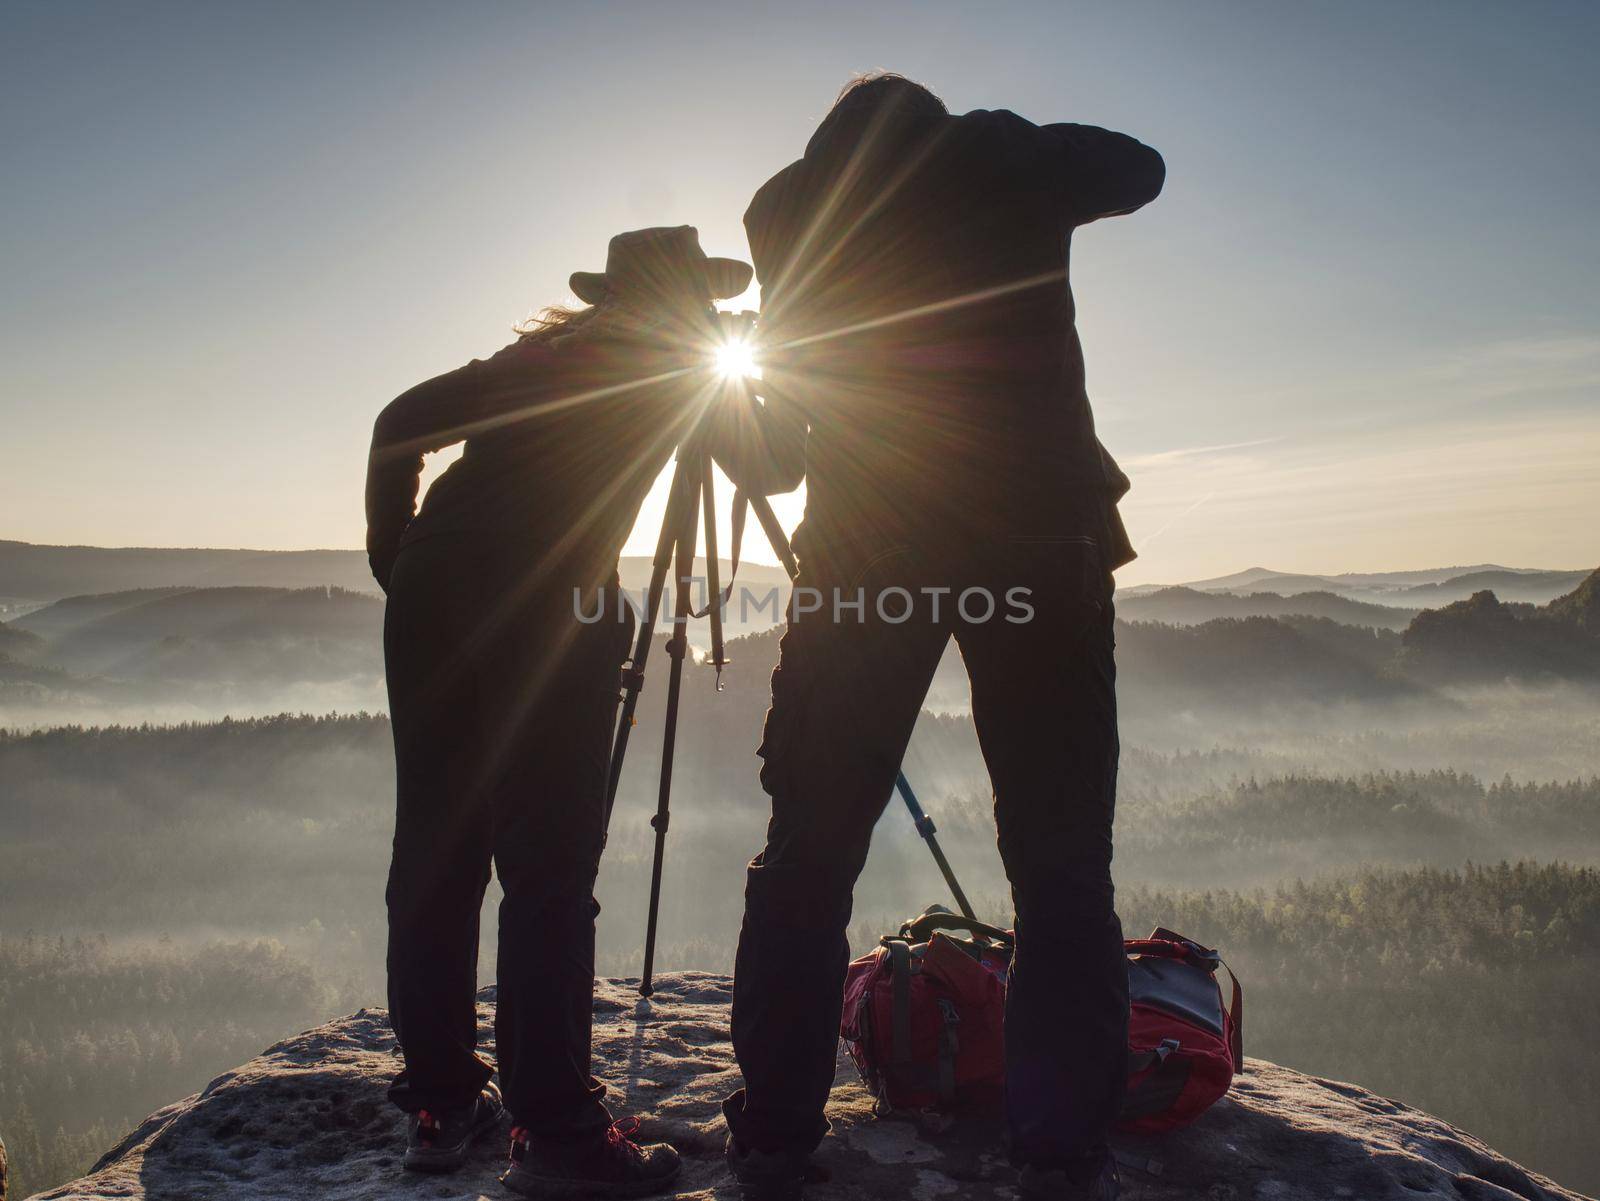 Two hikers taking pictures and talk on top of the mountain. Hikers photographers with photo gear relaxing on top of a mountain and enjoying the view of valley